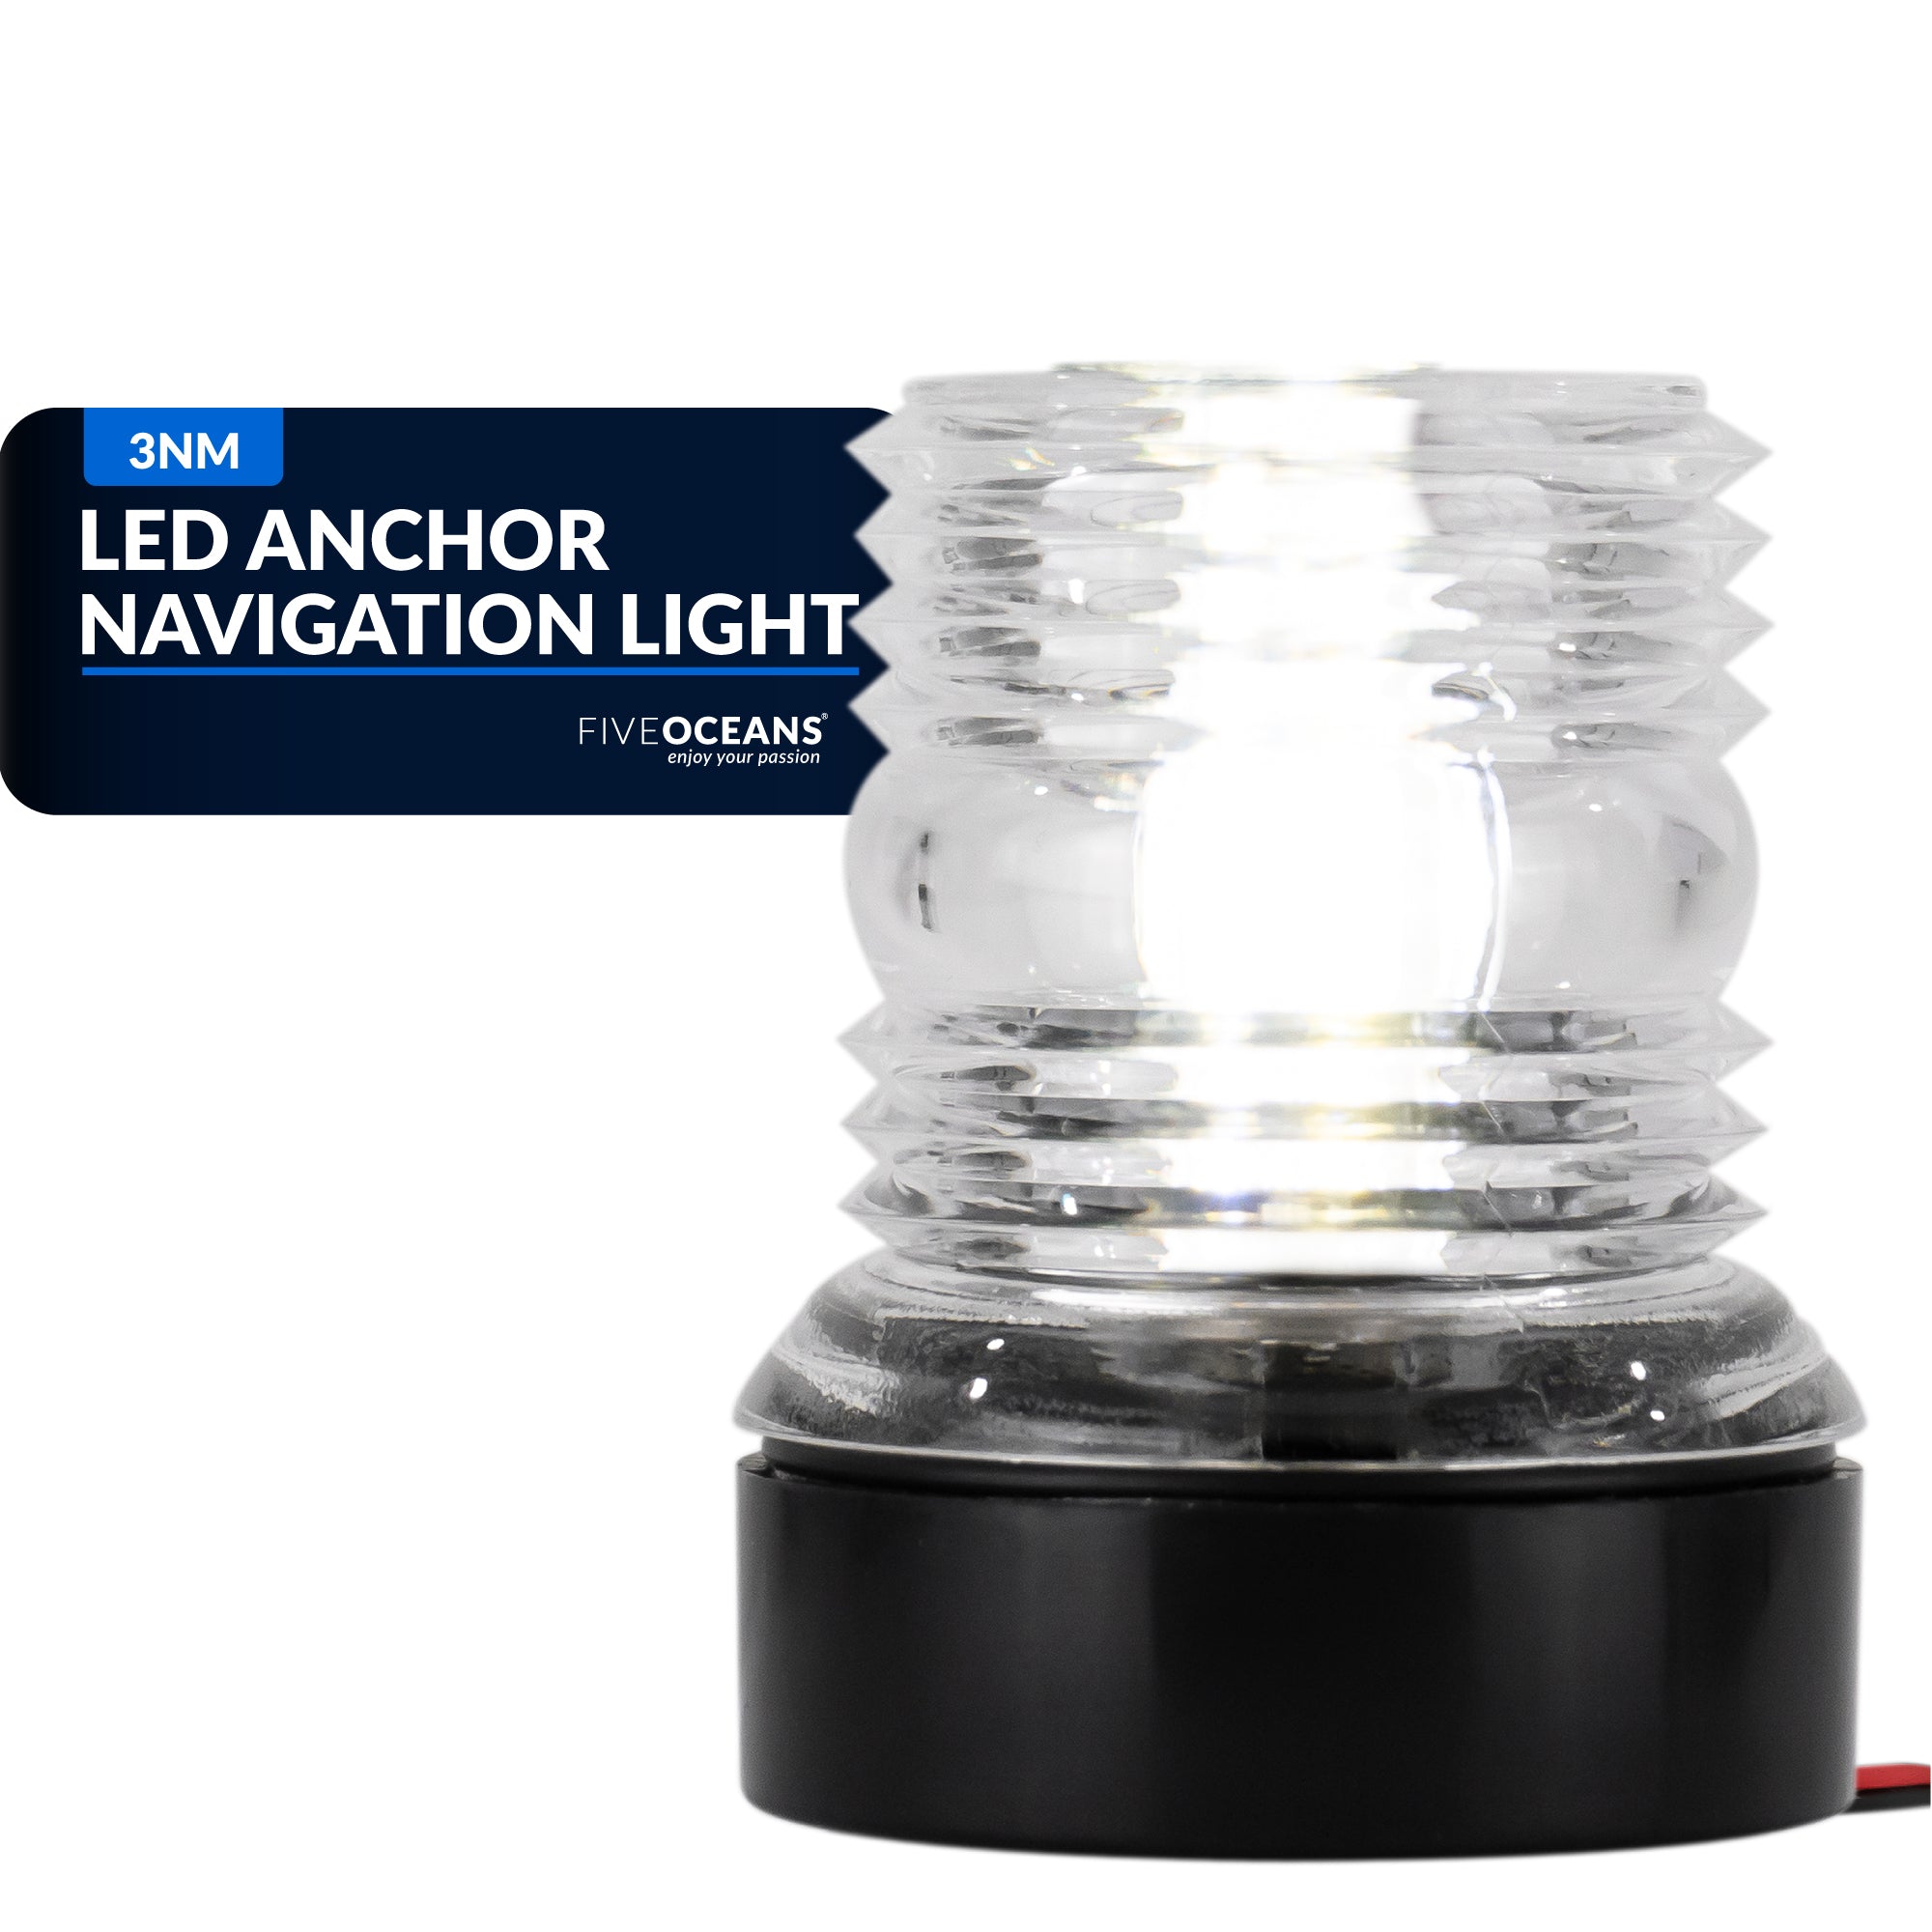 LED Anchor Navigation Light, 3NM, Fixed Mount - FO3838